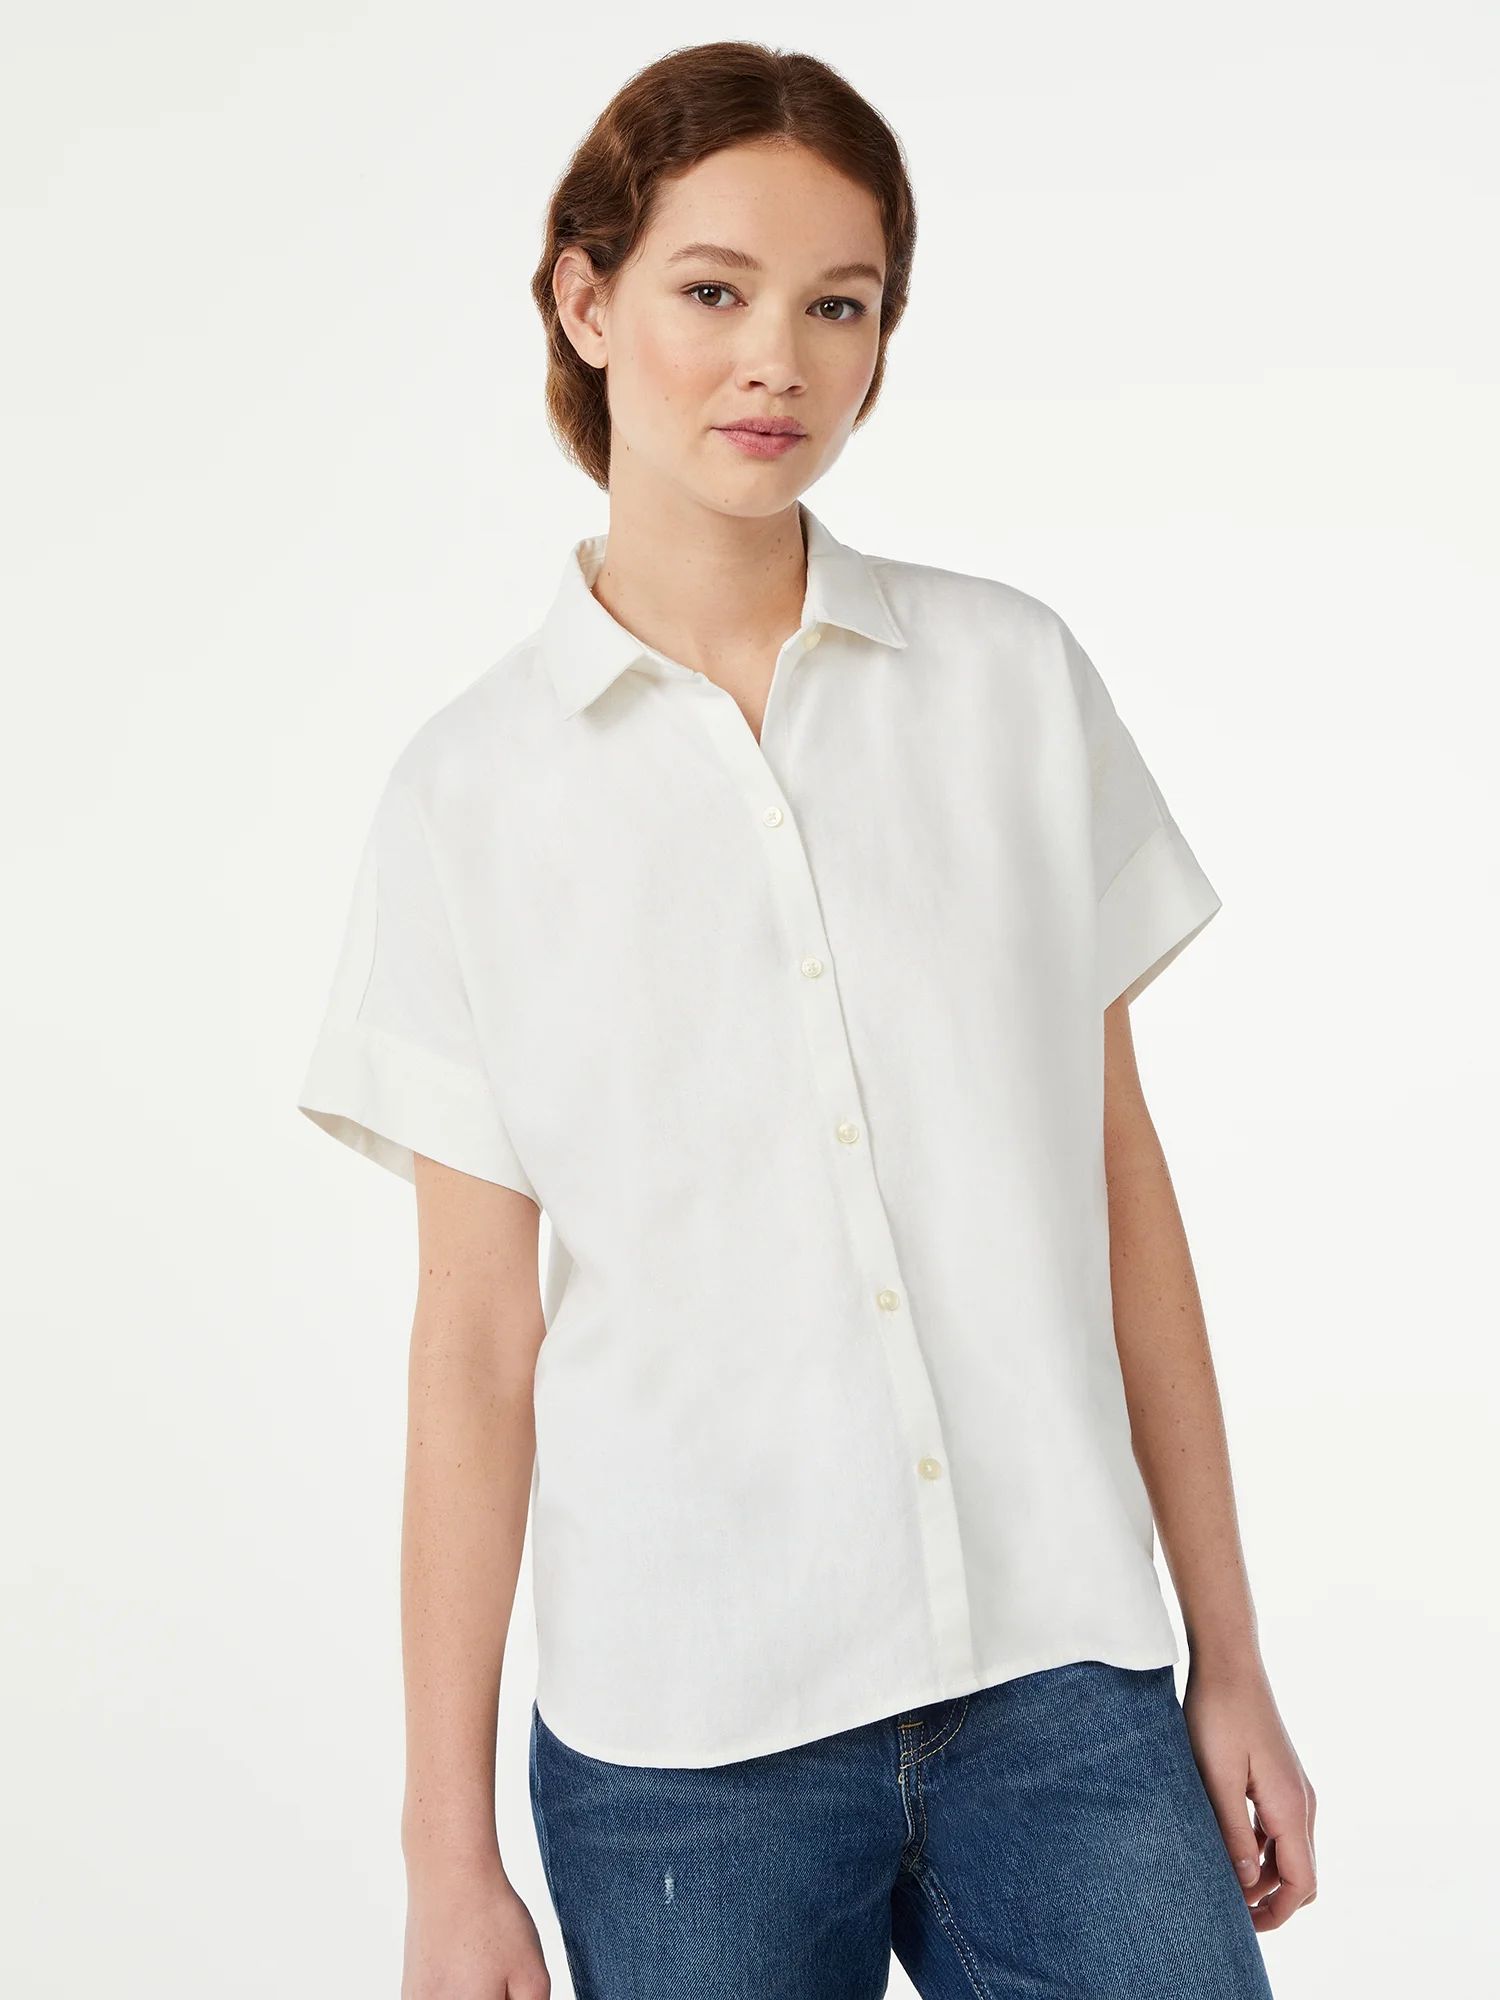 Free Assembly Women's Button Down Shirt with Short Sleeves | Walmart (US)